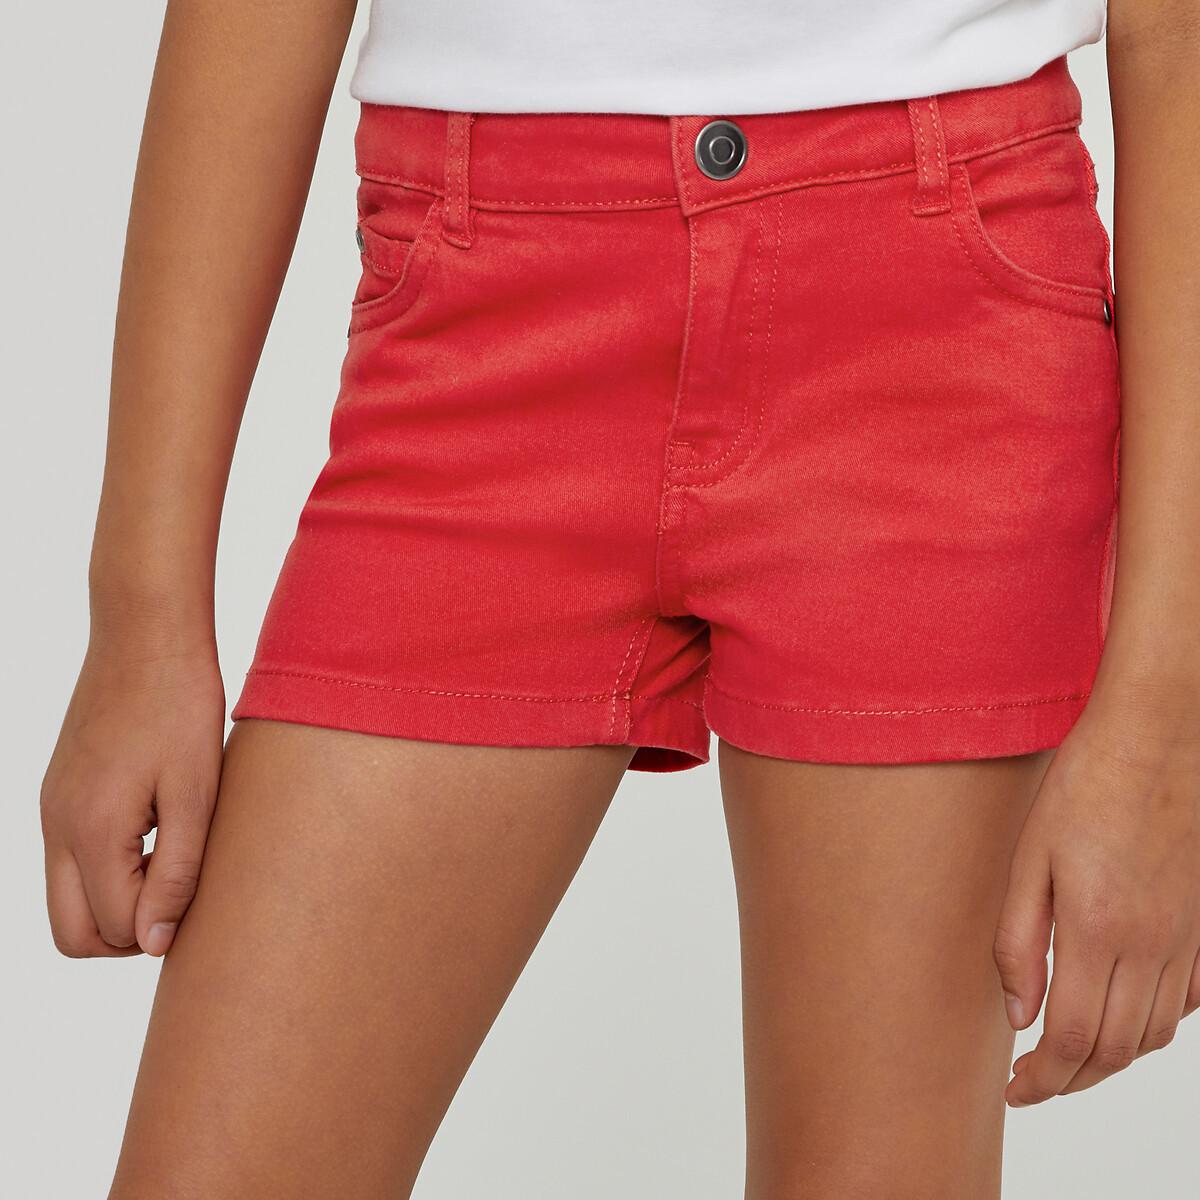 La Redoute Collections  Shorts in Five-Pocket-Form 